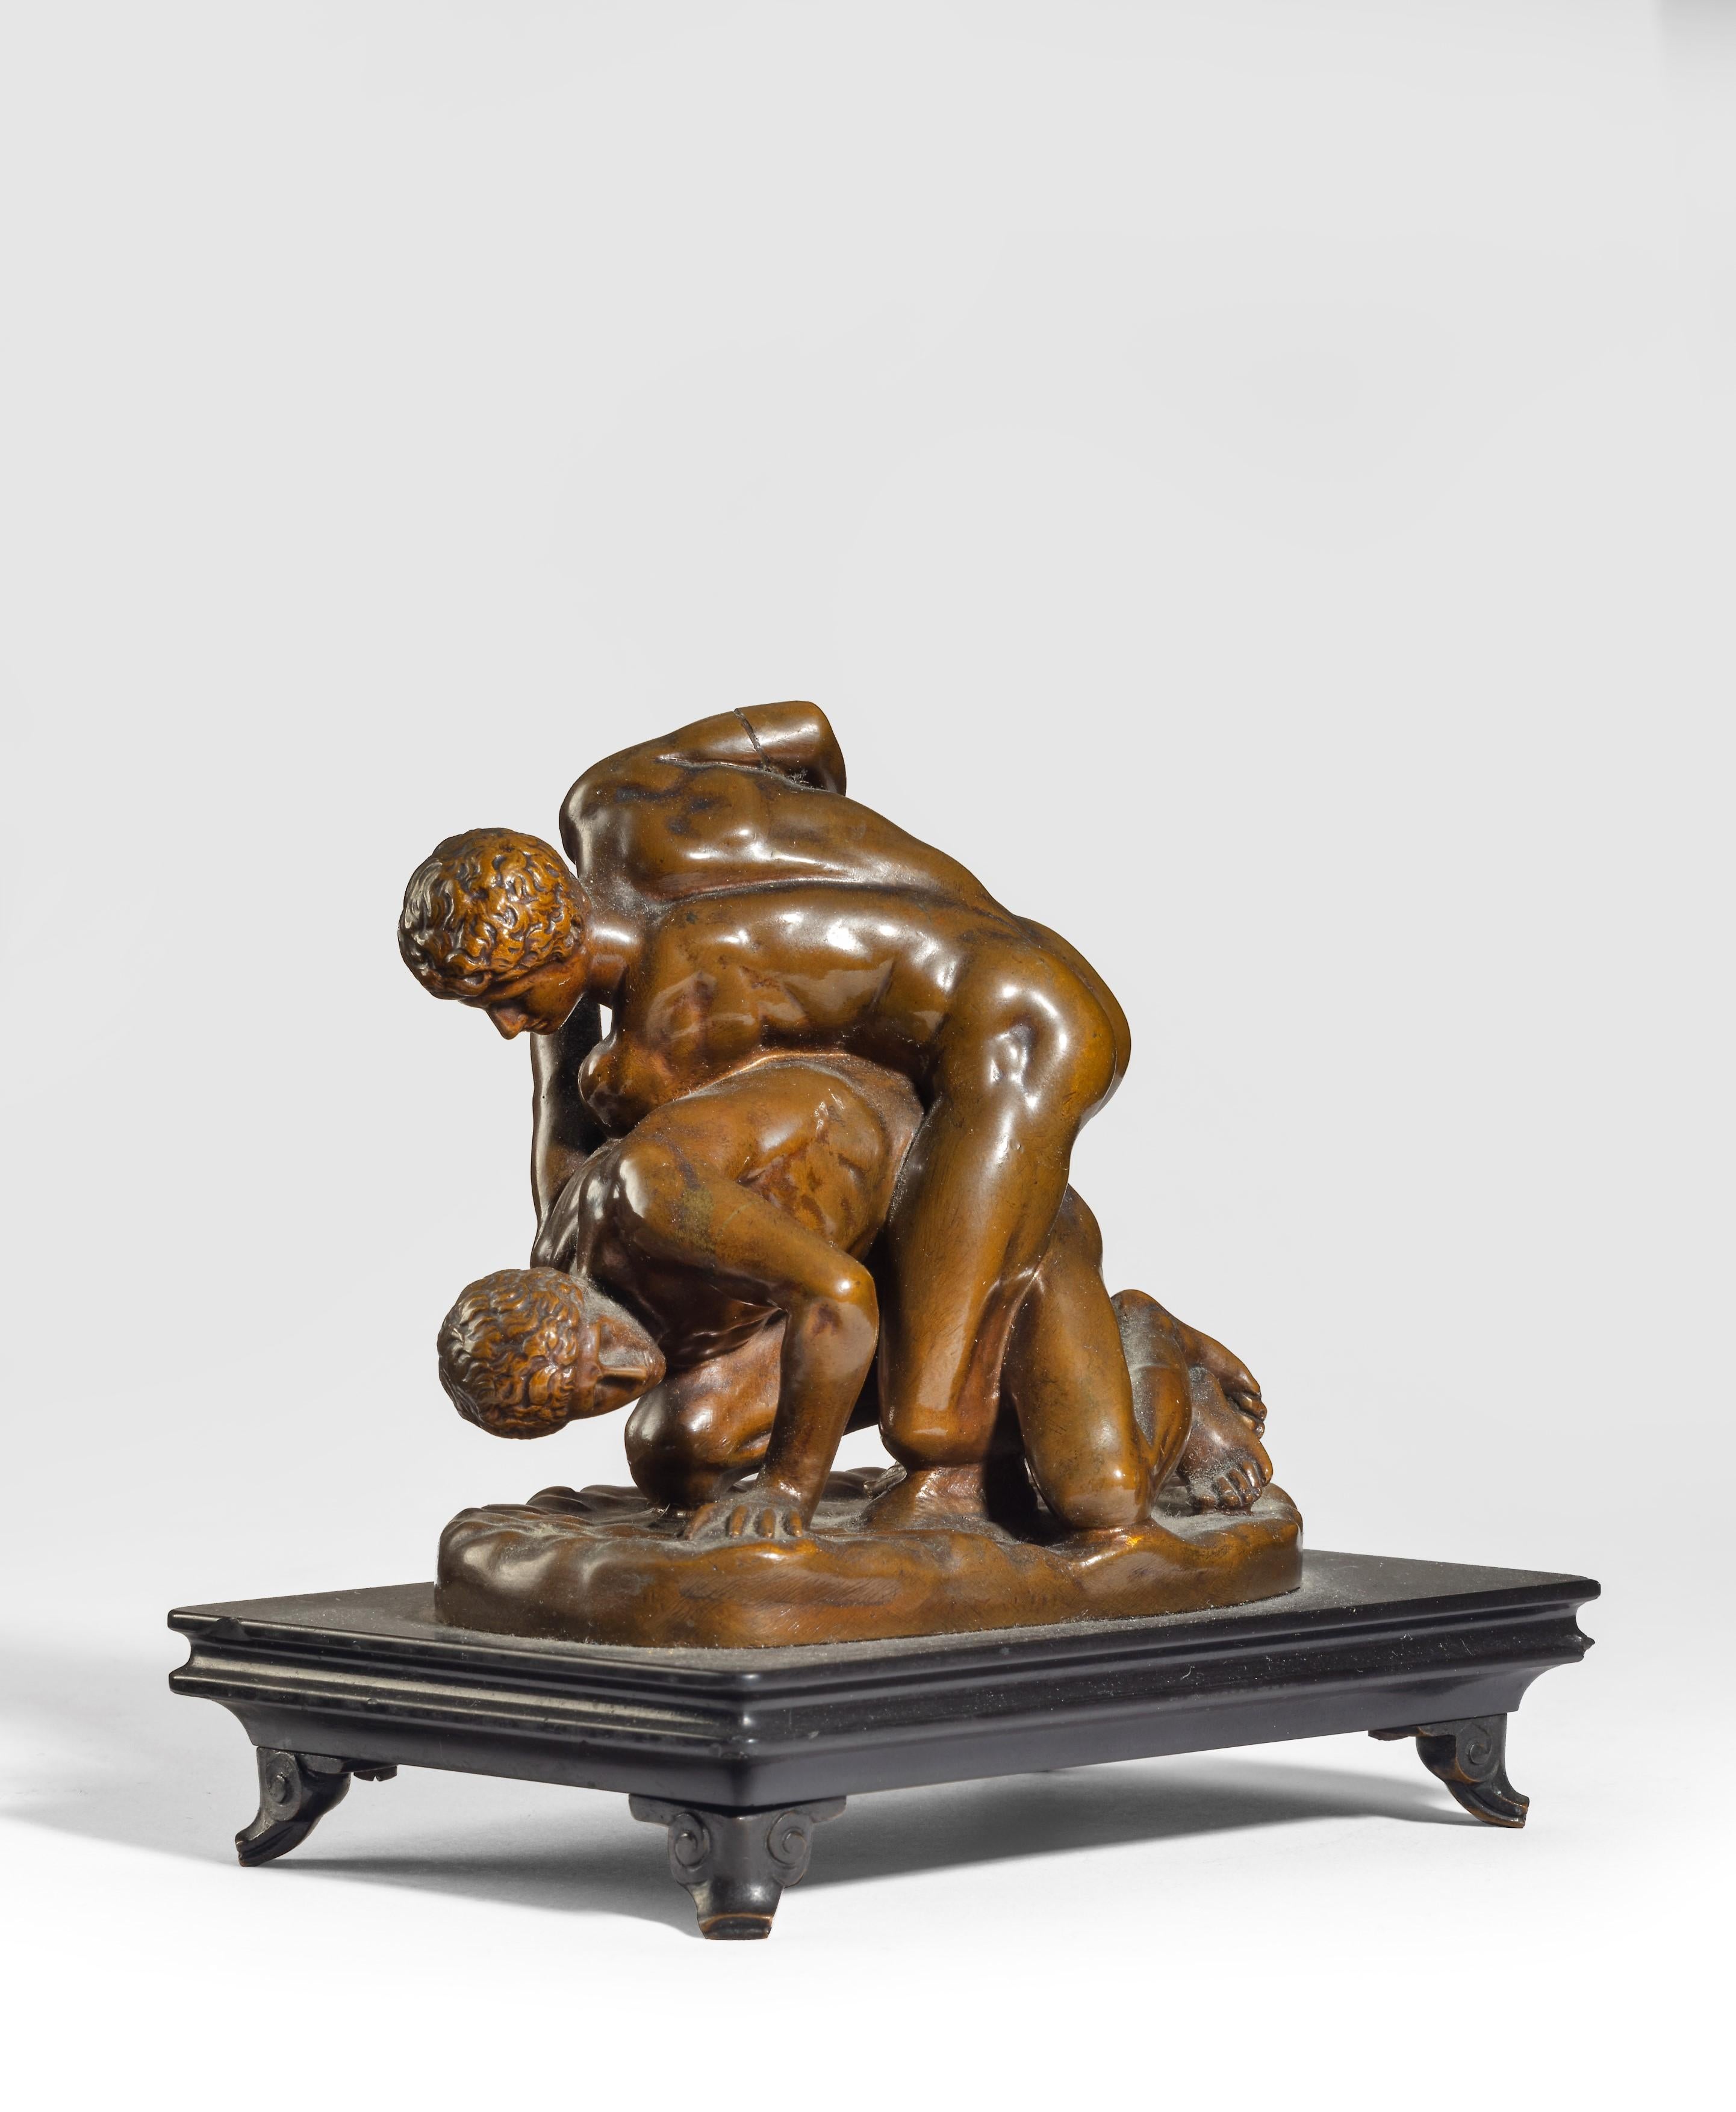 A Grand Tour bronze model of 'The Wrestlers', After the Antique - Gold Figurative Sculpture by Unknown